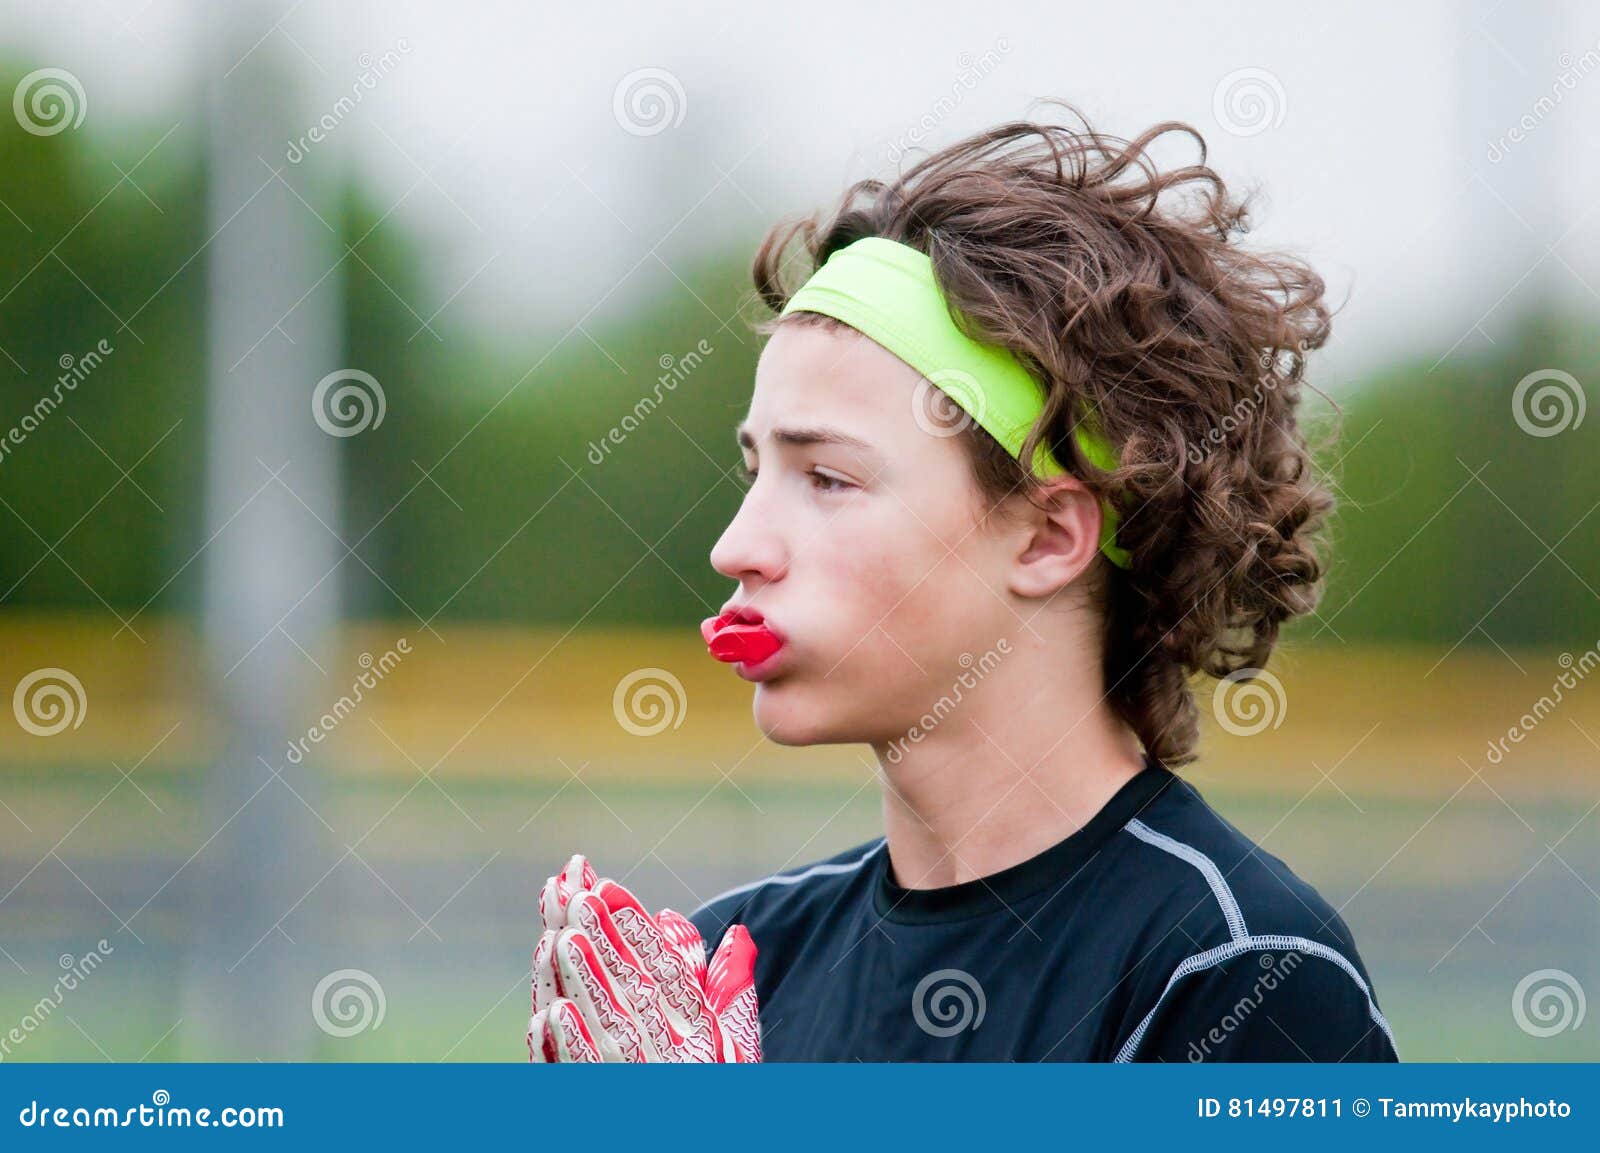 Youth Football Boy with Long Hair Stock Image - Image of long, sport:  81497811